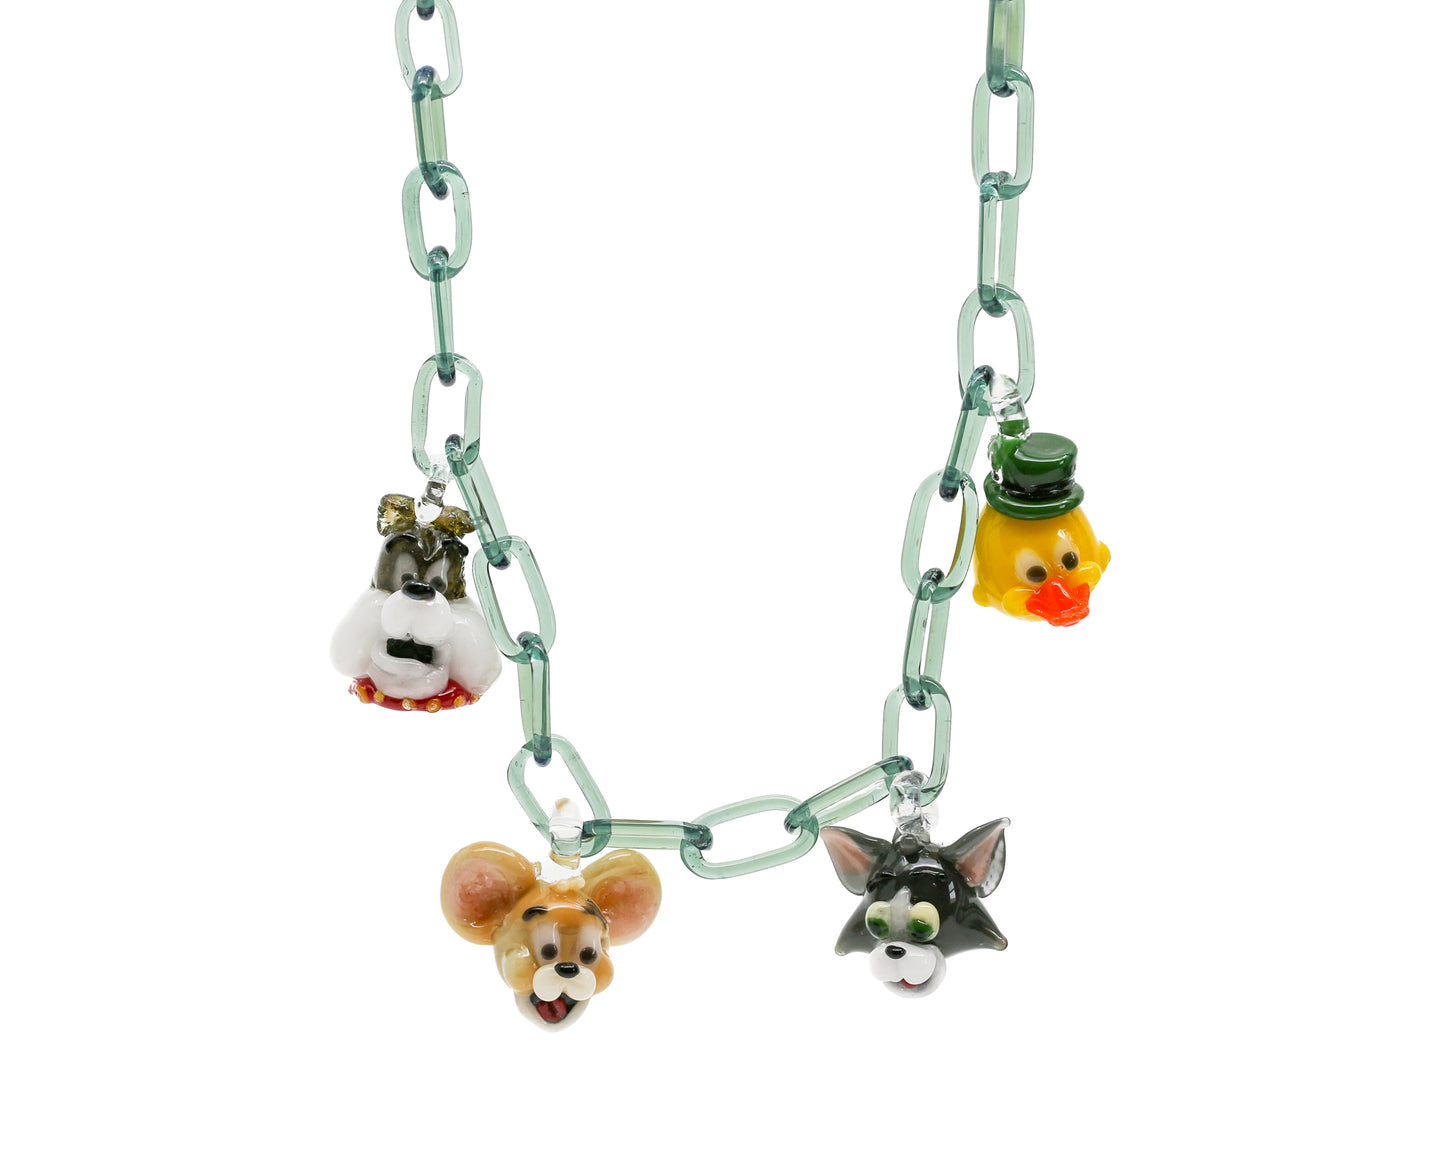 Tammy Baller "Cat & Mouse" Chain Link Necklace